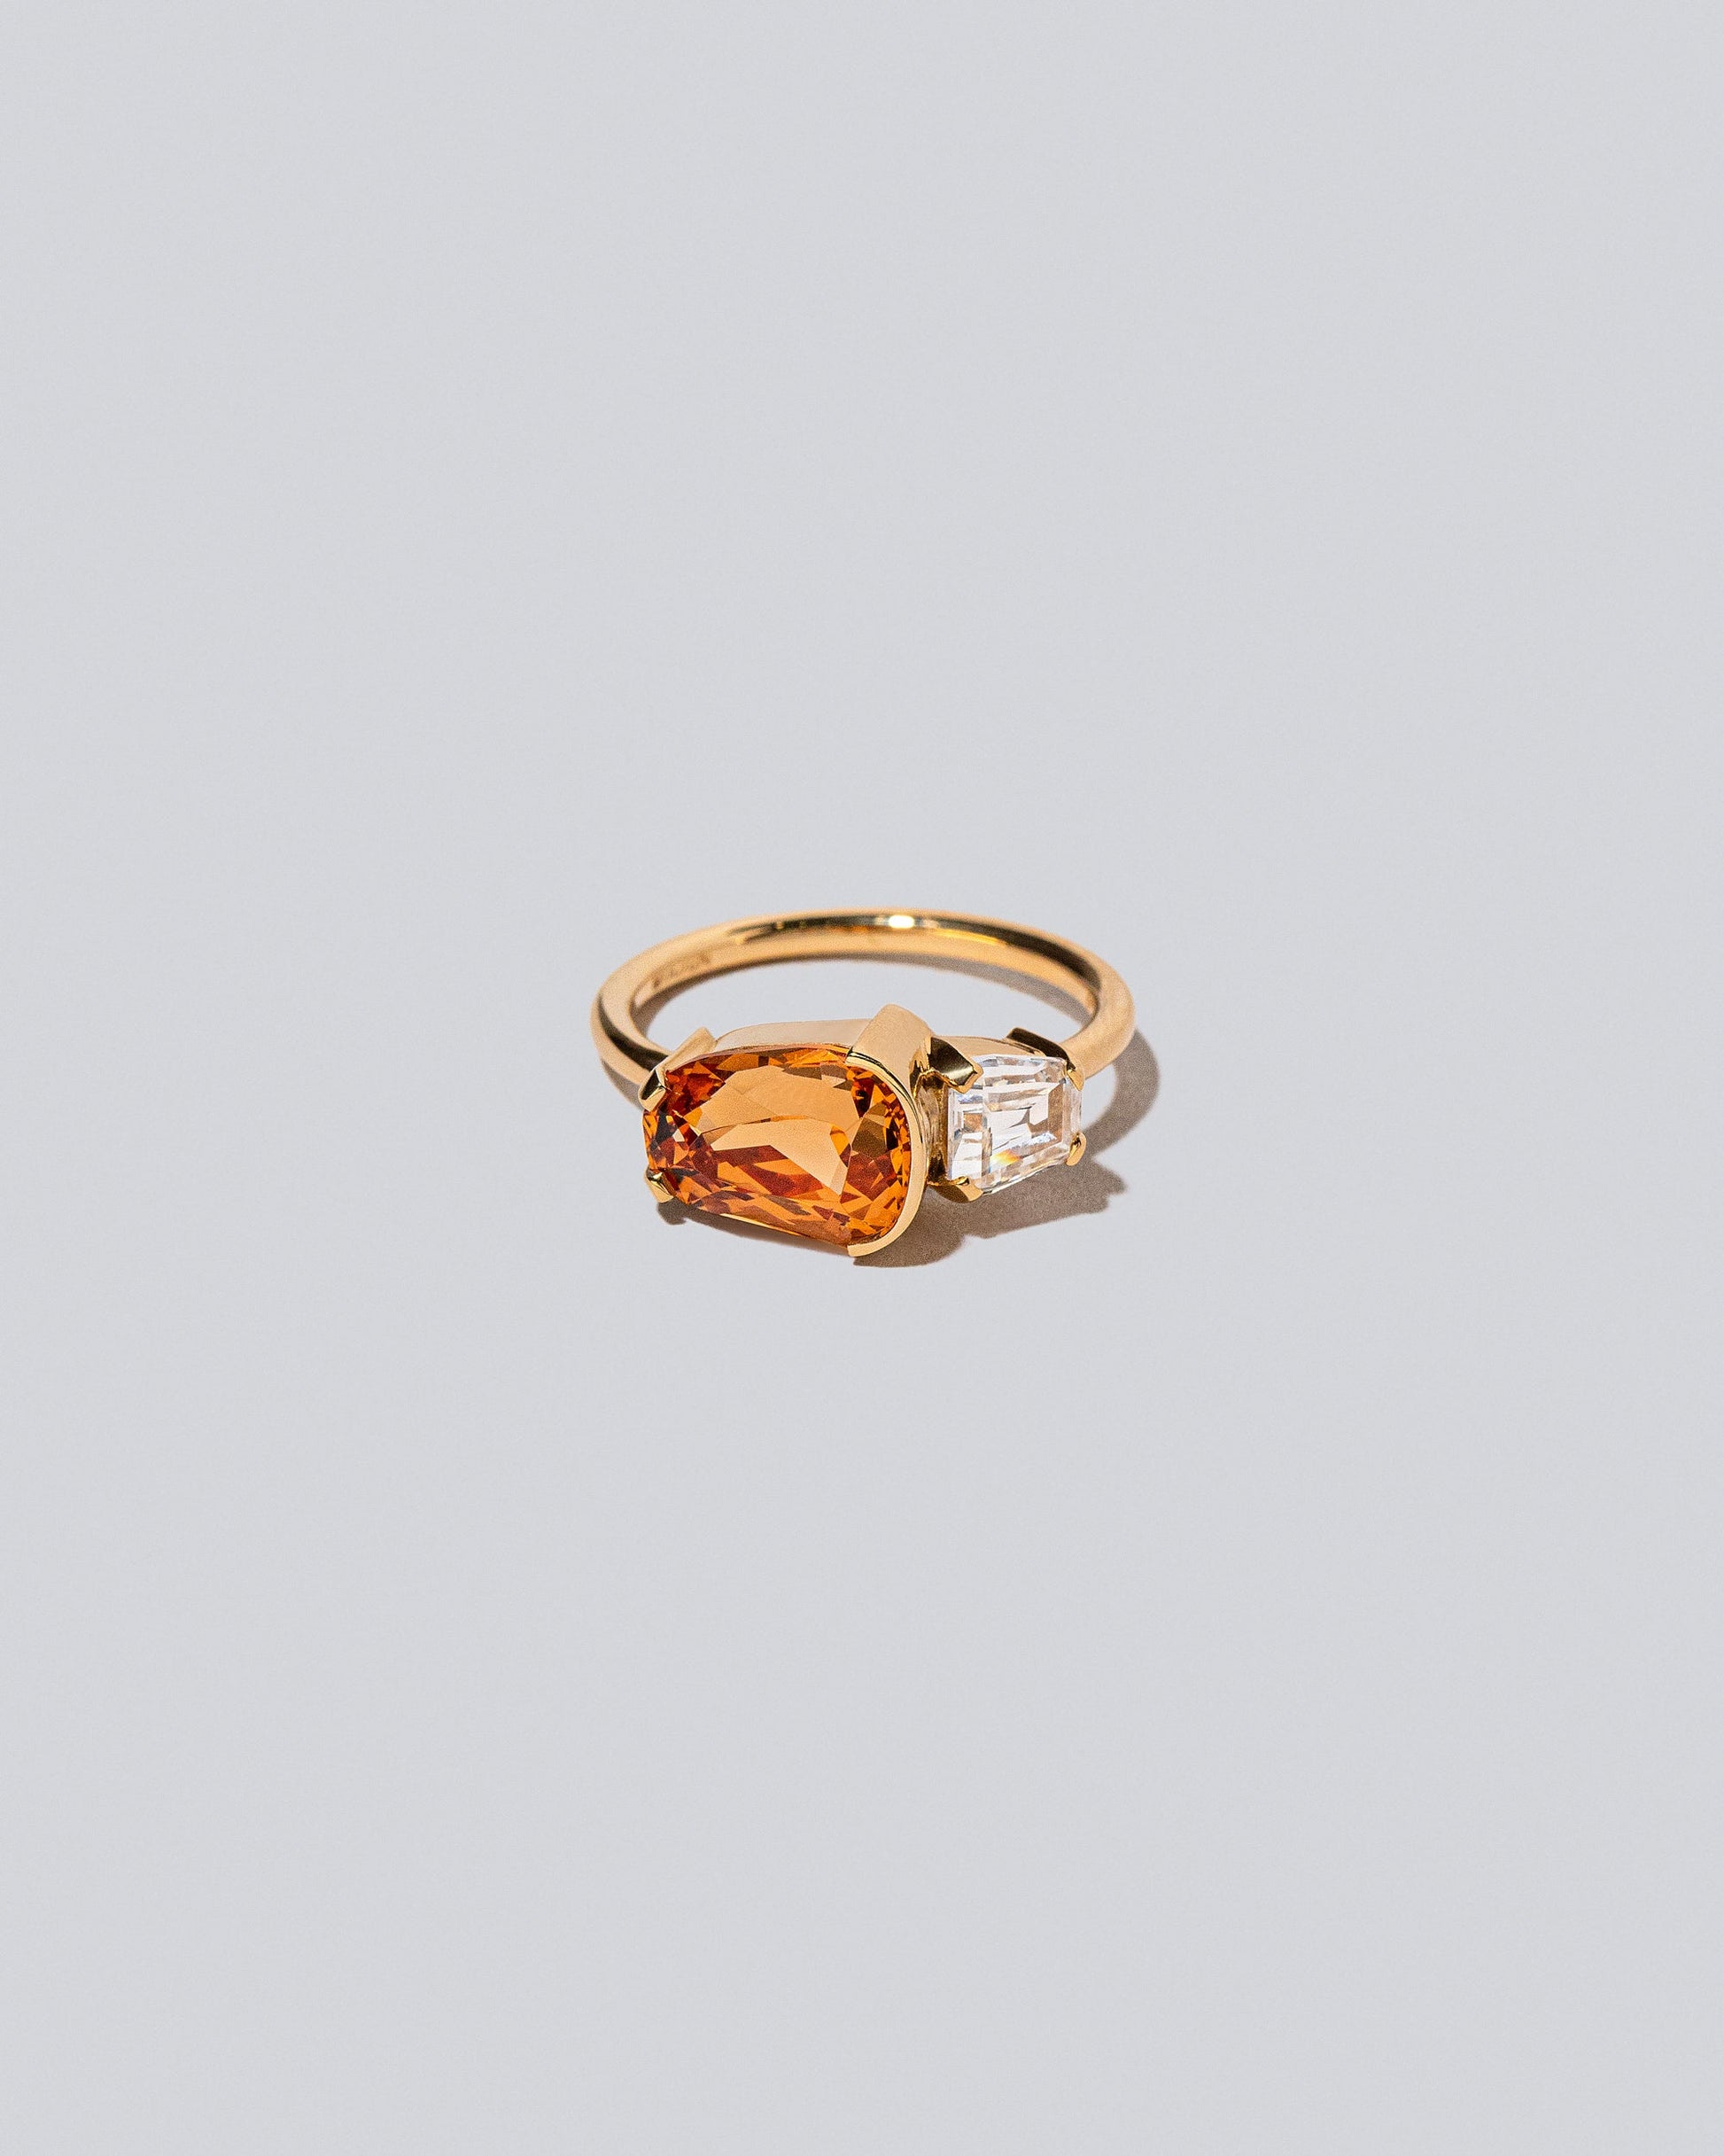 Product photo of the Golden Poppy Ring on a light color background 